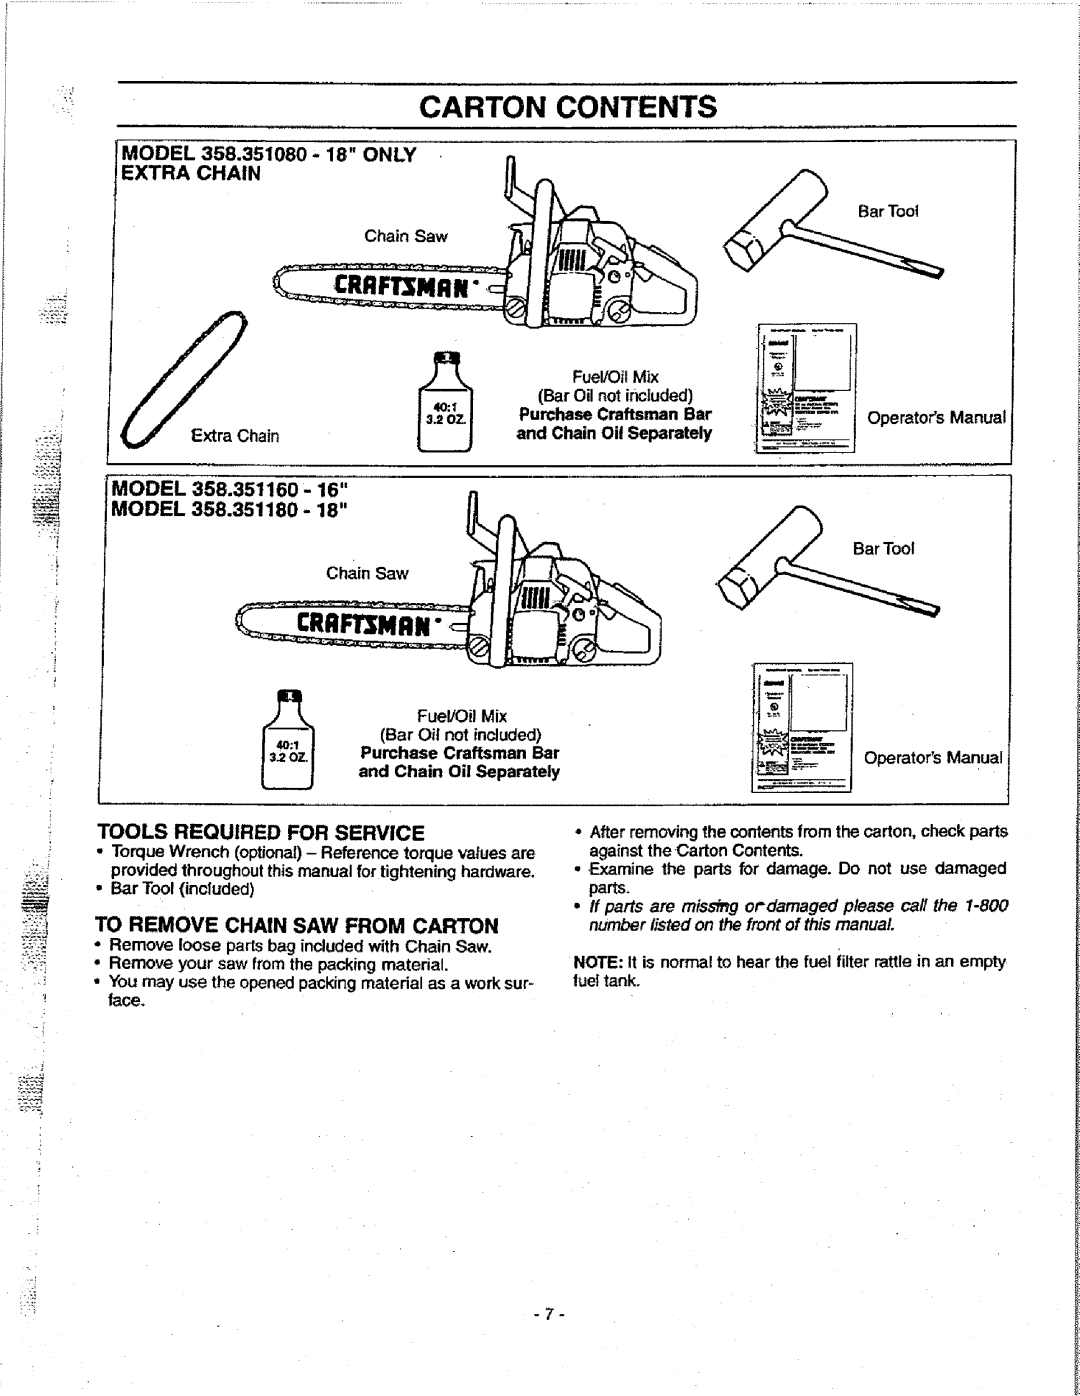 Craftsman 358.351080 manual Carton Contents, Model, 358.351180, Tools Required For Service, To Remove Chain Saw From Carton 